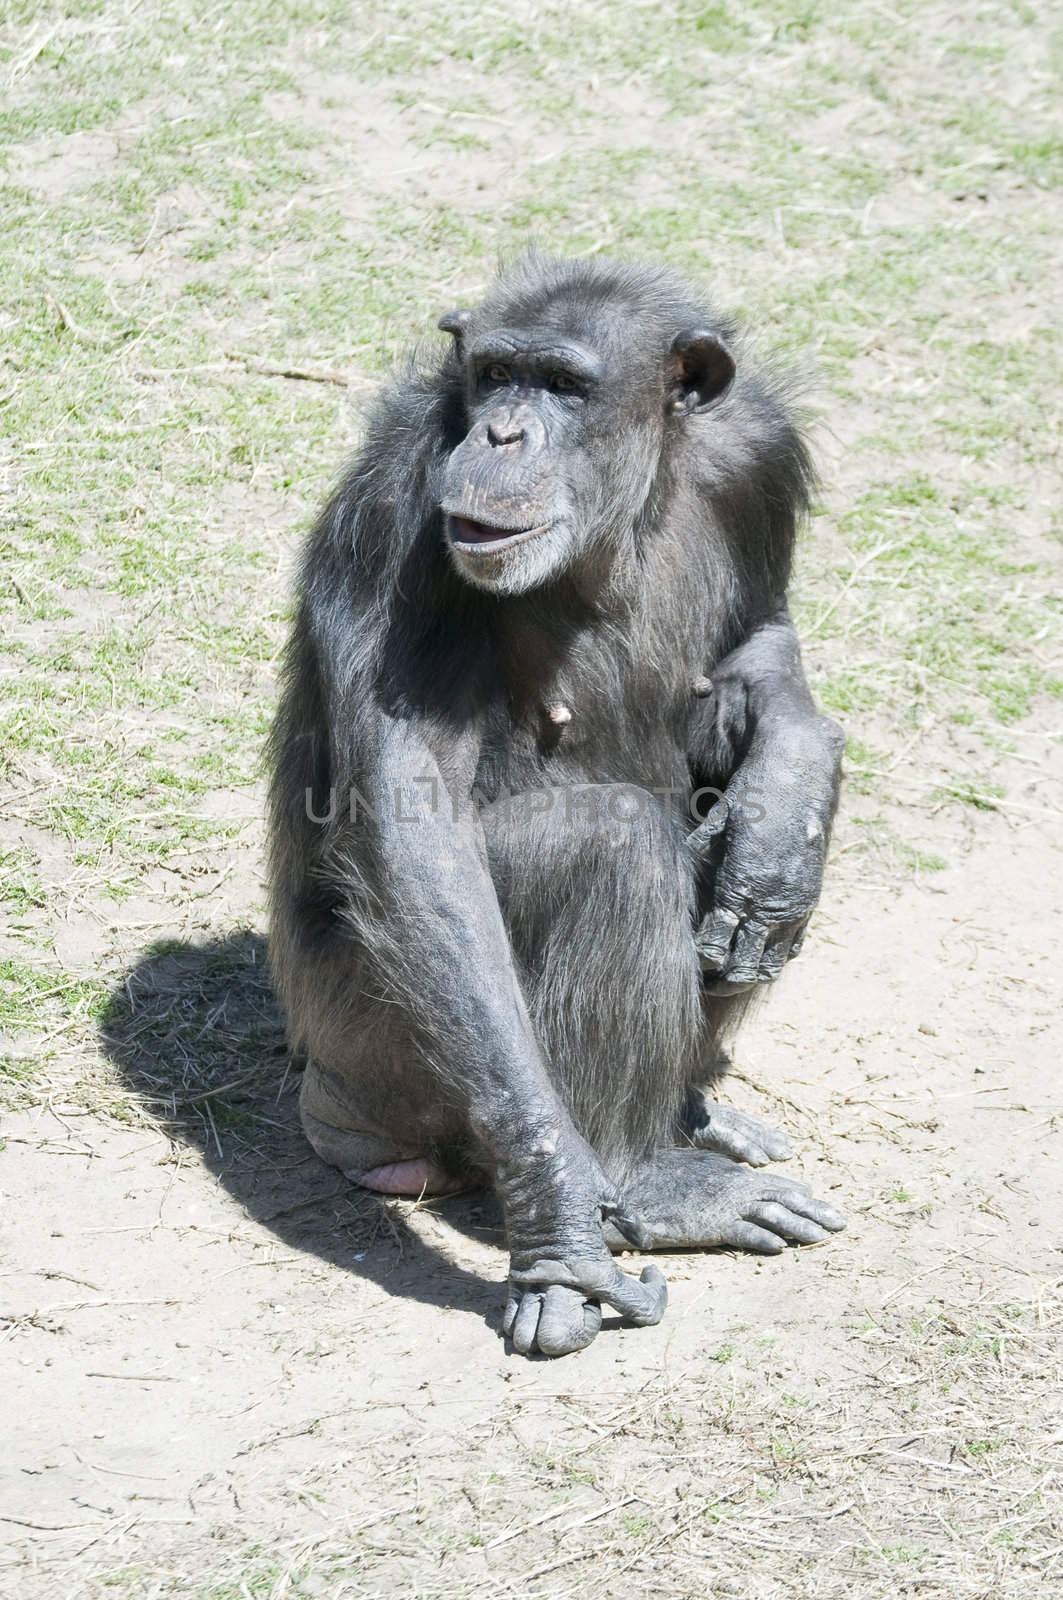 A chimp at the zoo posing for the camera